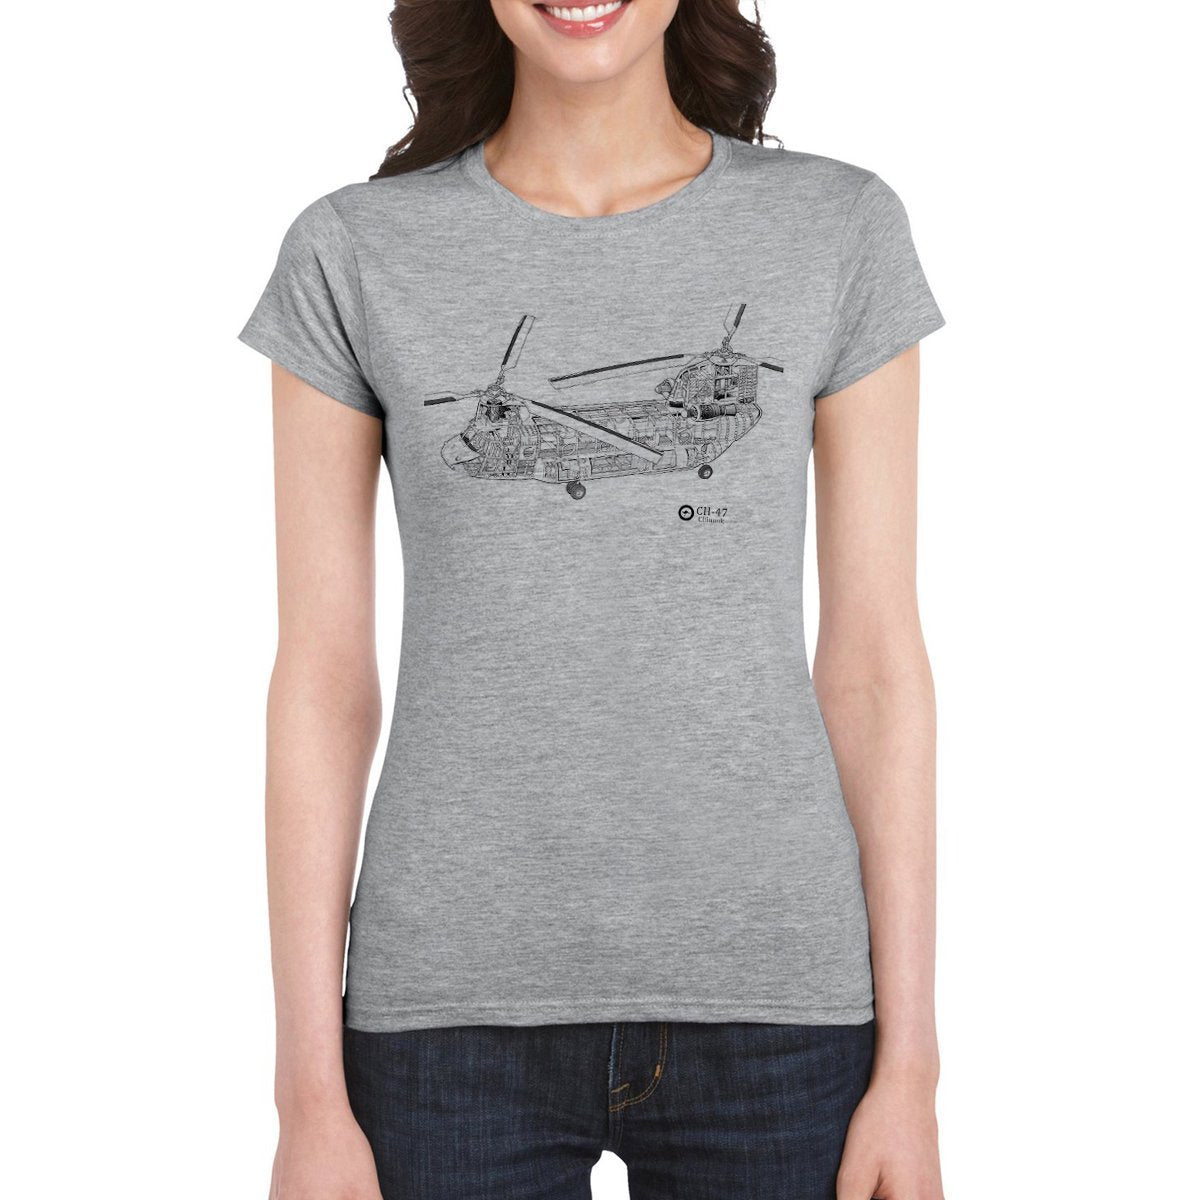 CHINOOK CUTAWAY Woman's Semi-Fitted T-Shirt